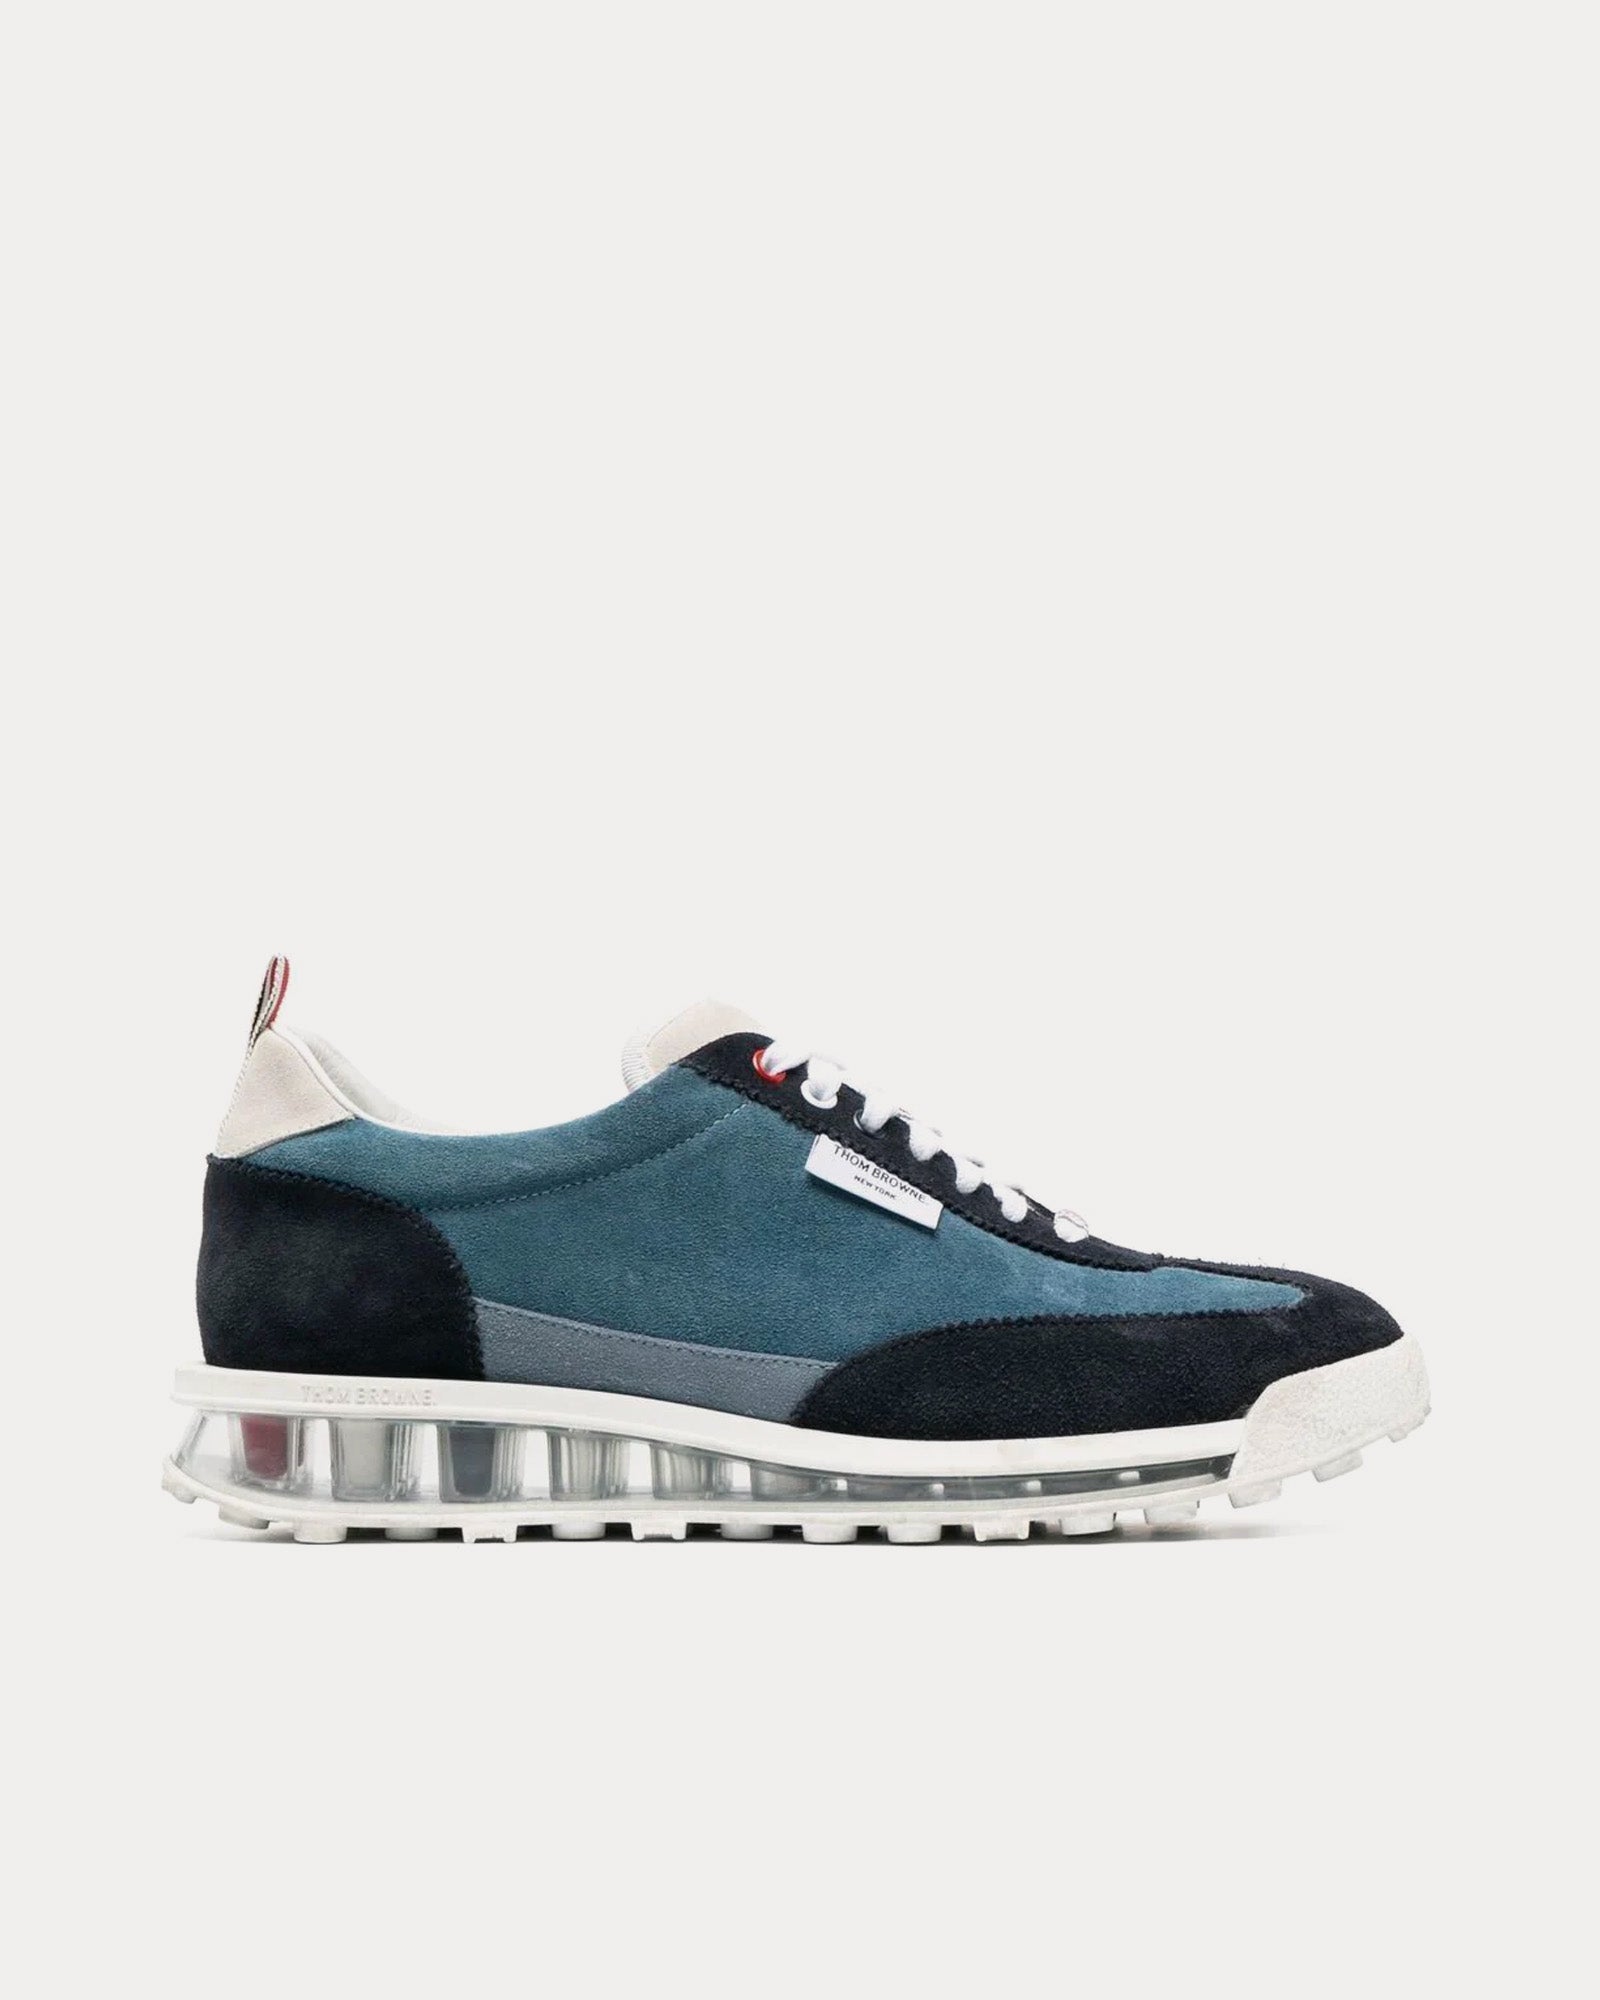 Thom Browne - Tech Runner Clear Sole Suede Tonal Blue Low Top Sneakers